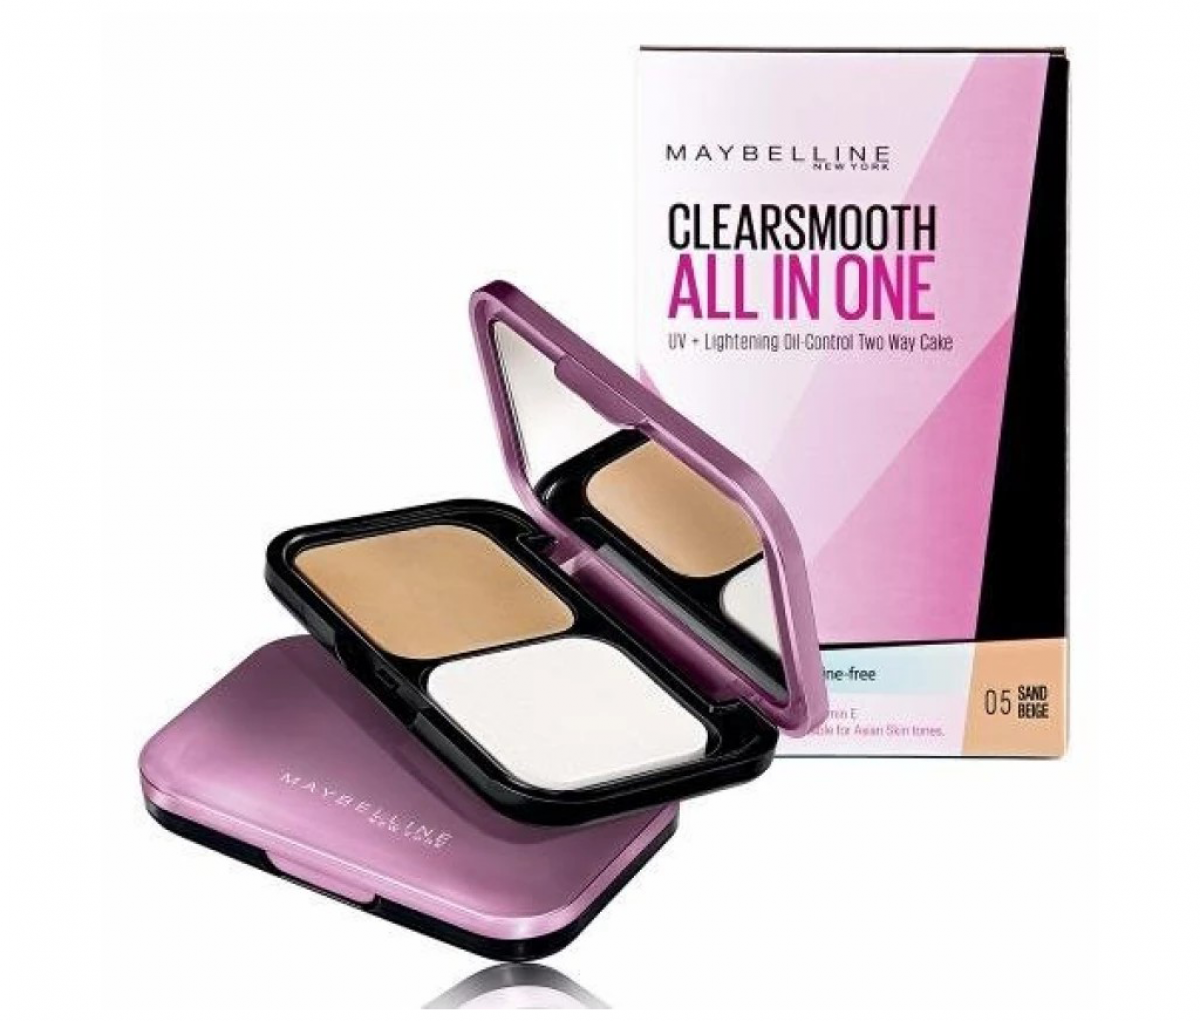 Maybelline Clear Smooth All in One Face Powder PA 05 SAND BEIGE